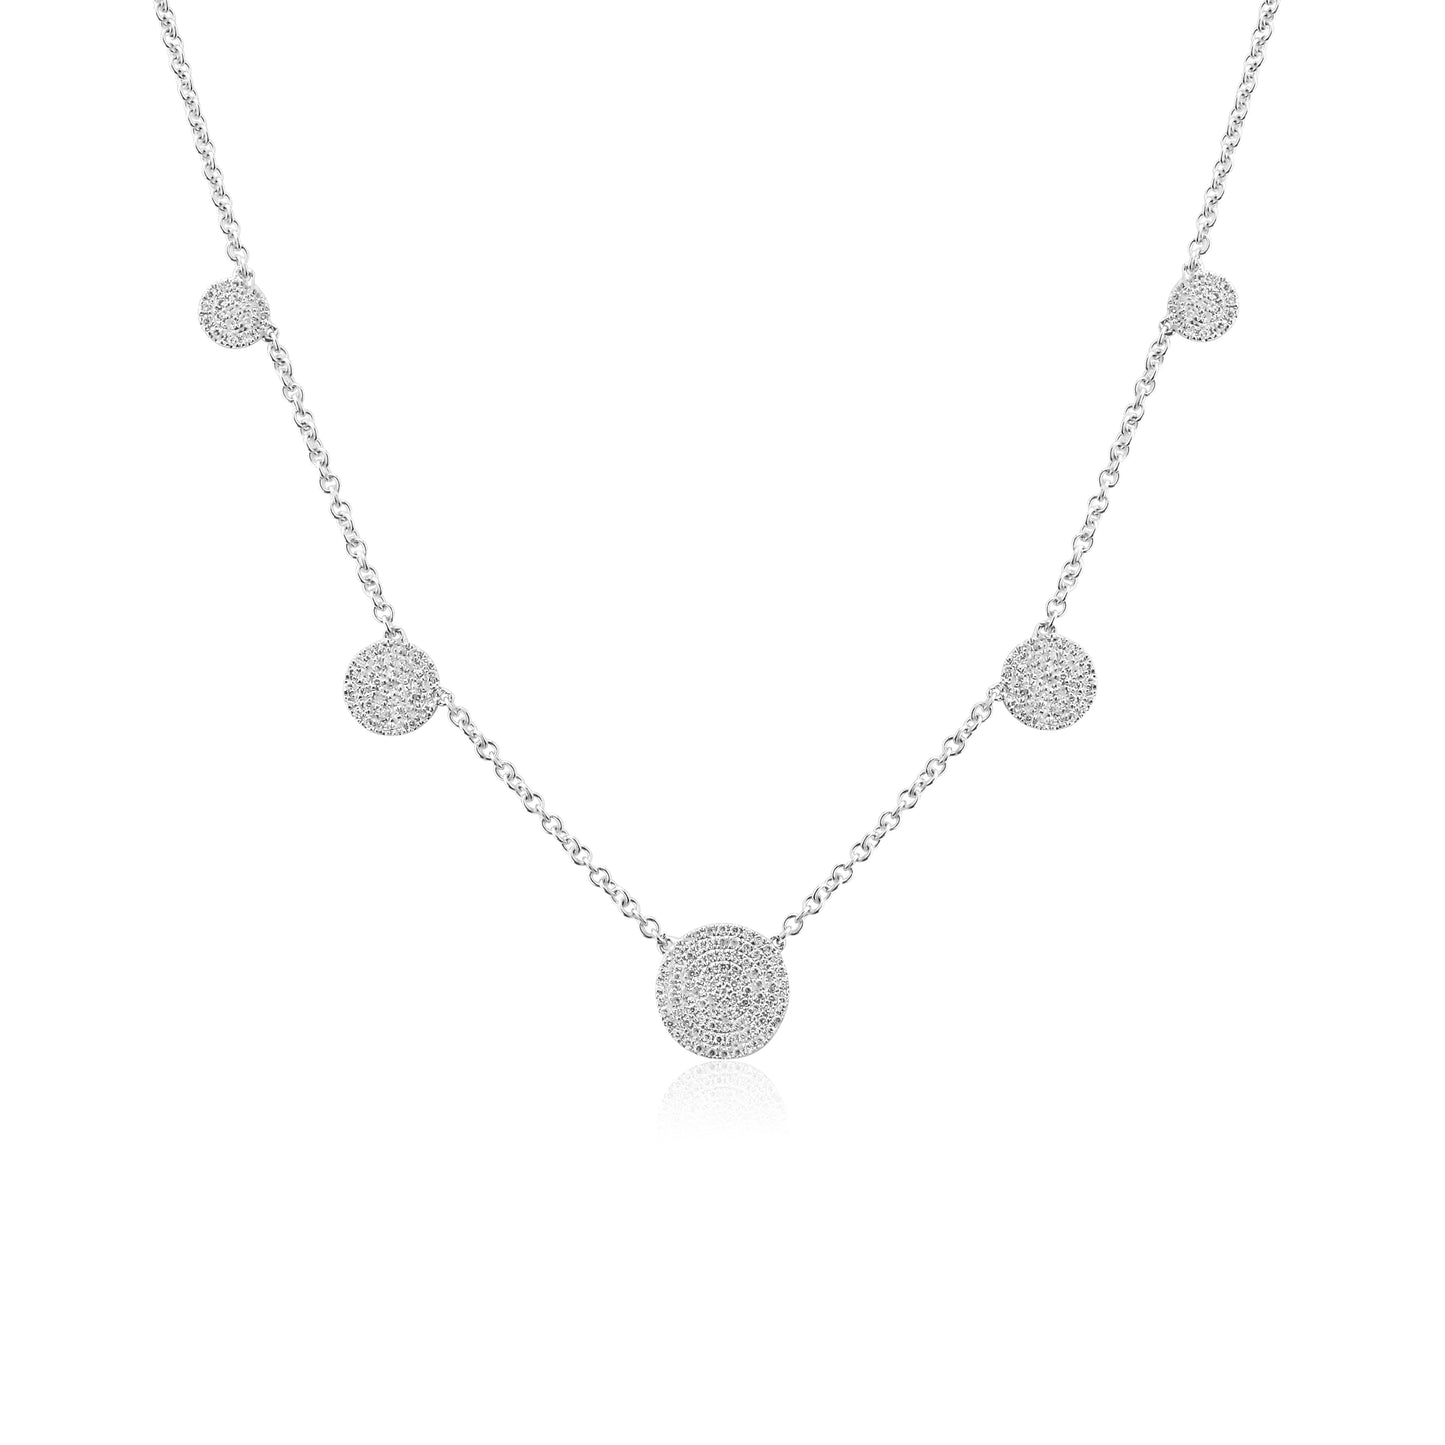 White Gold Necklaces White Gold Diamond Hanging Disc Necklace dansonjewelers Danson Jewelers 